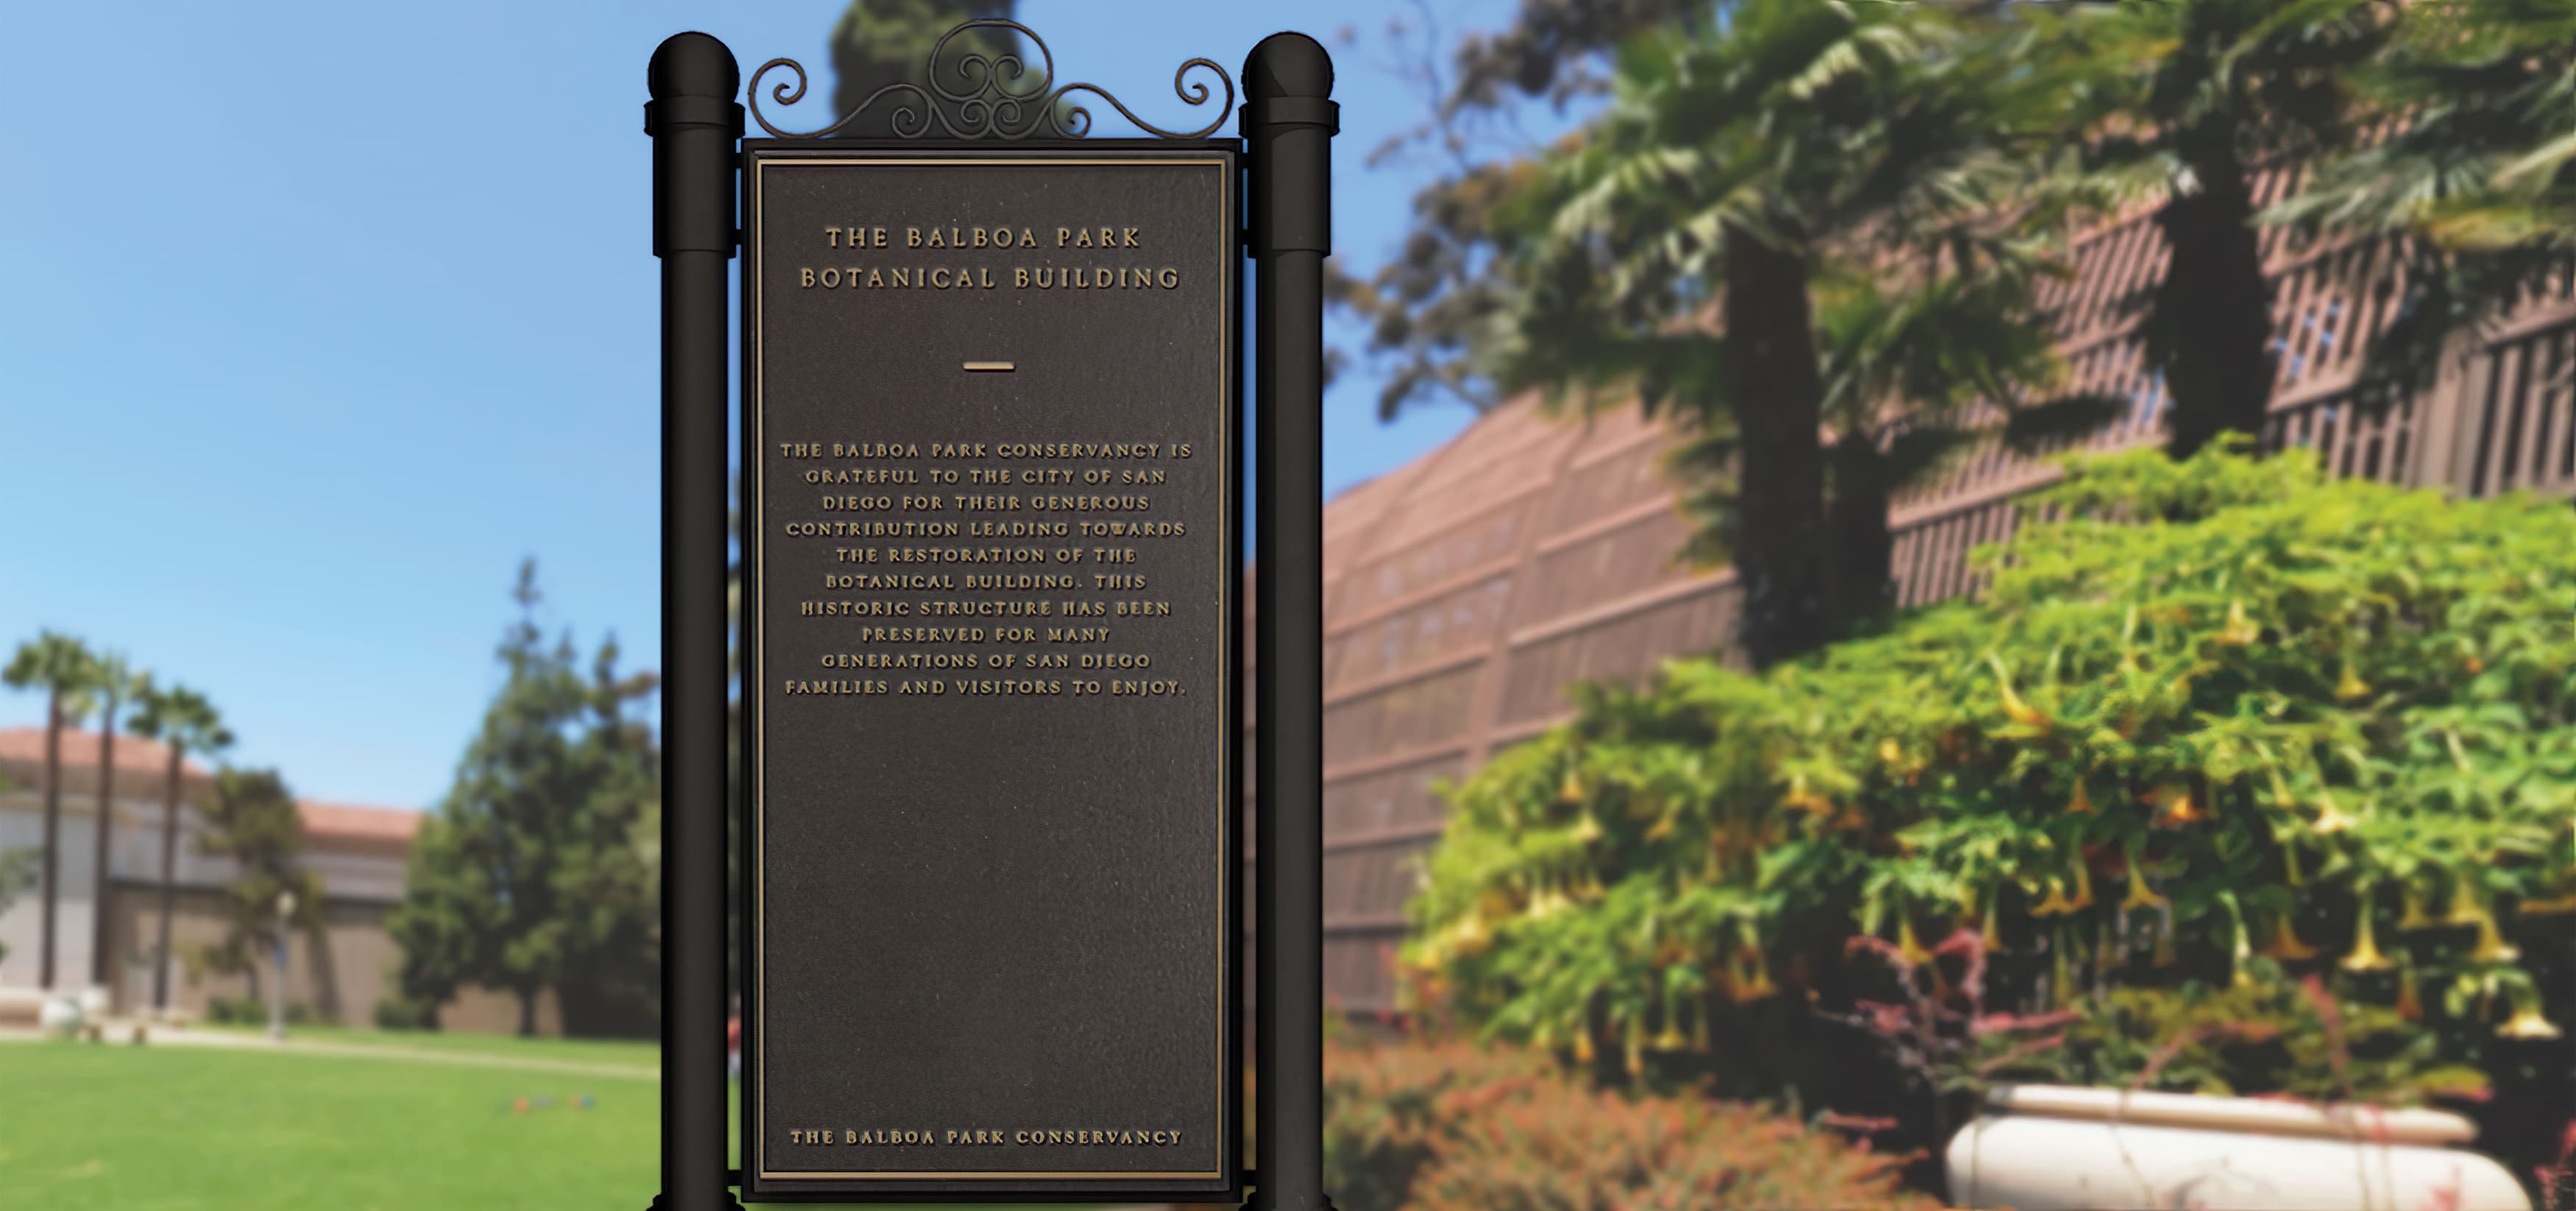 Balboa Botanical Building in San Diego, California. RSM Design performed services such as Wayfinding Signage, Exhibit Design, Donor Recognition, and Placemaking.